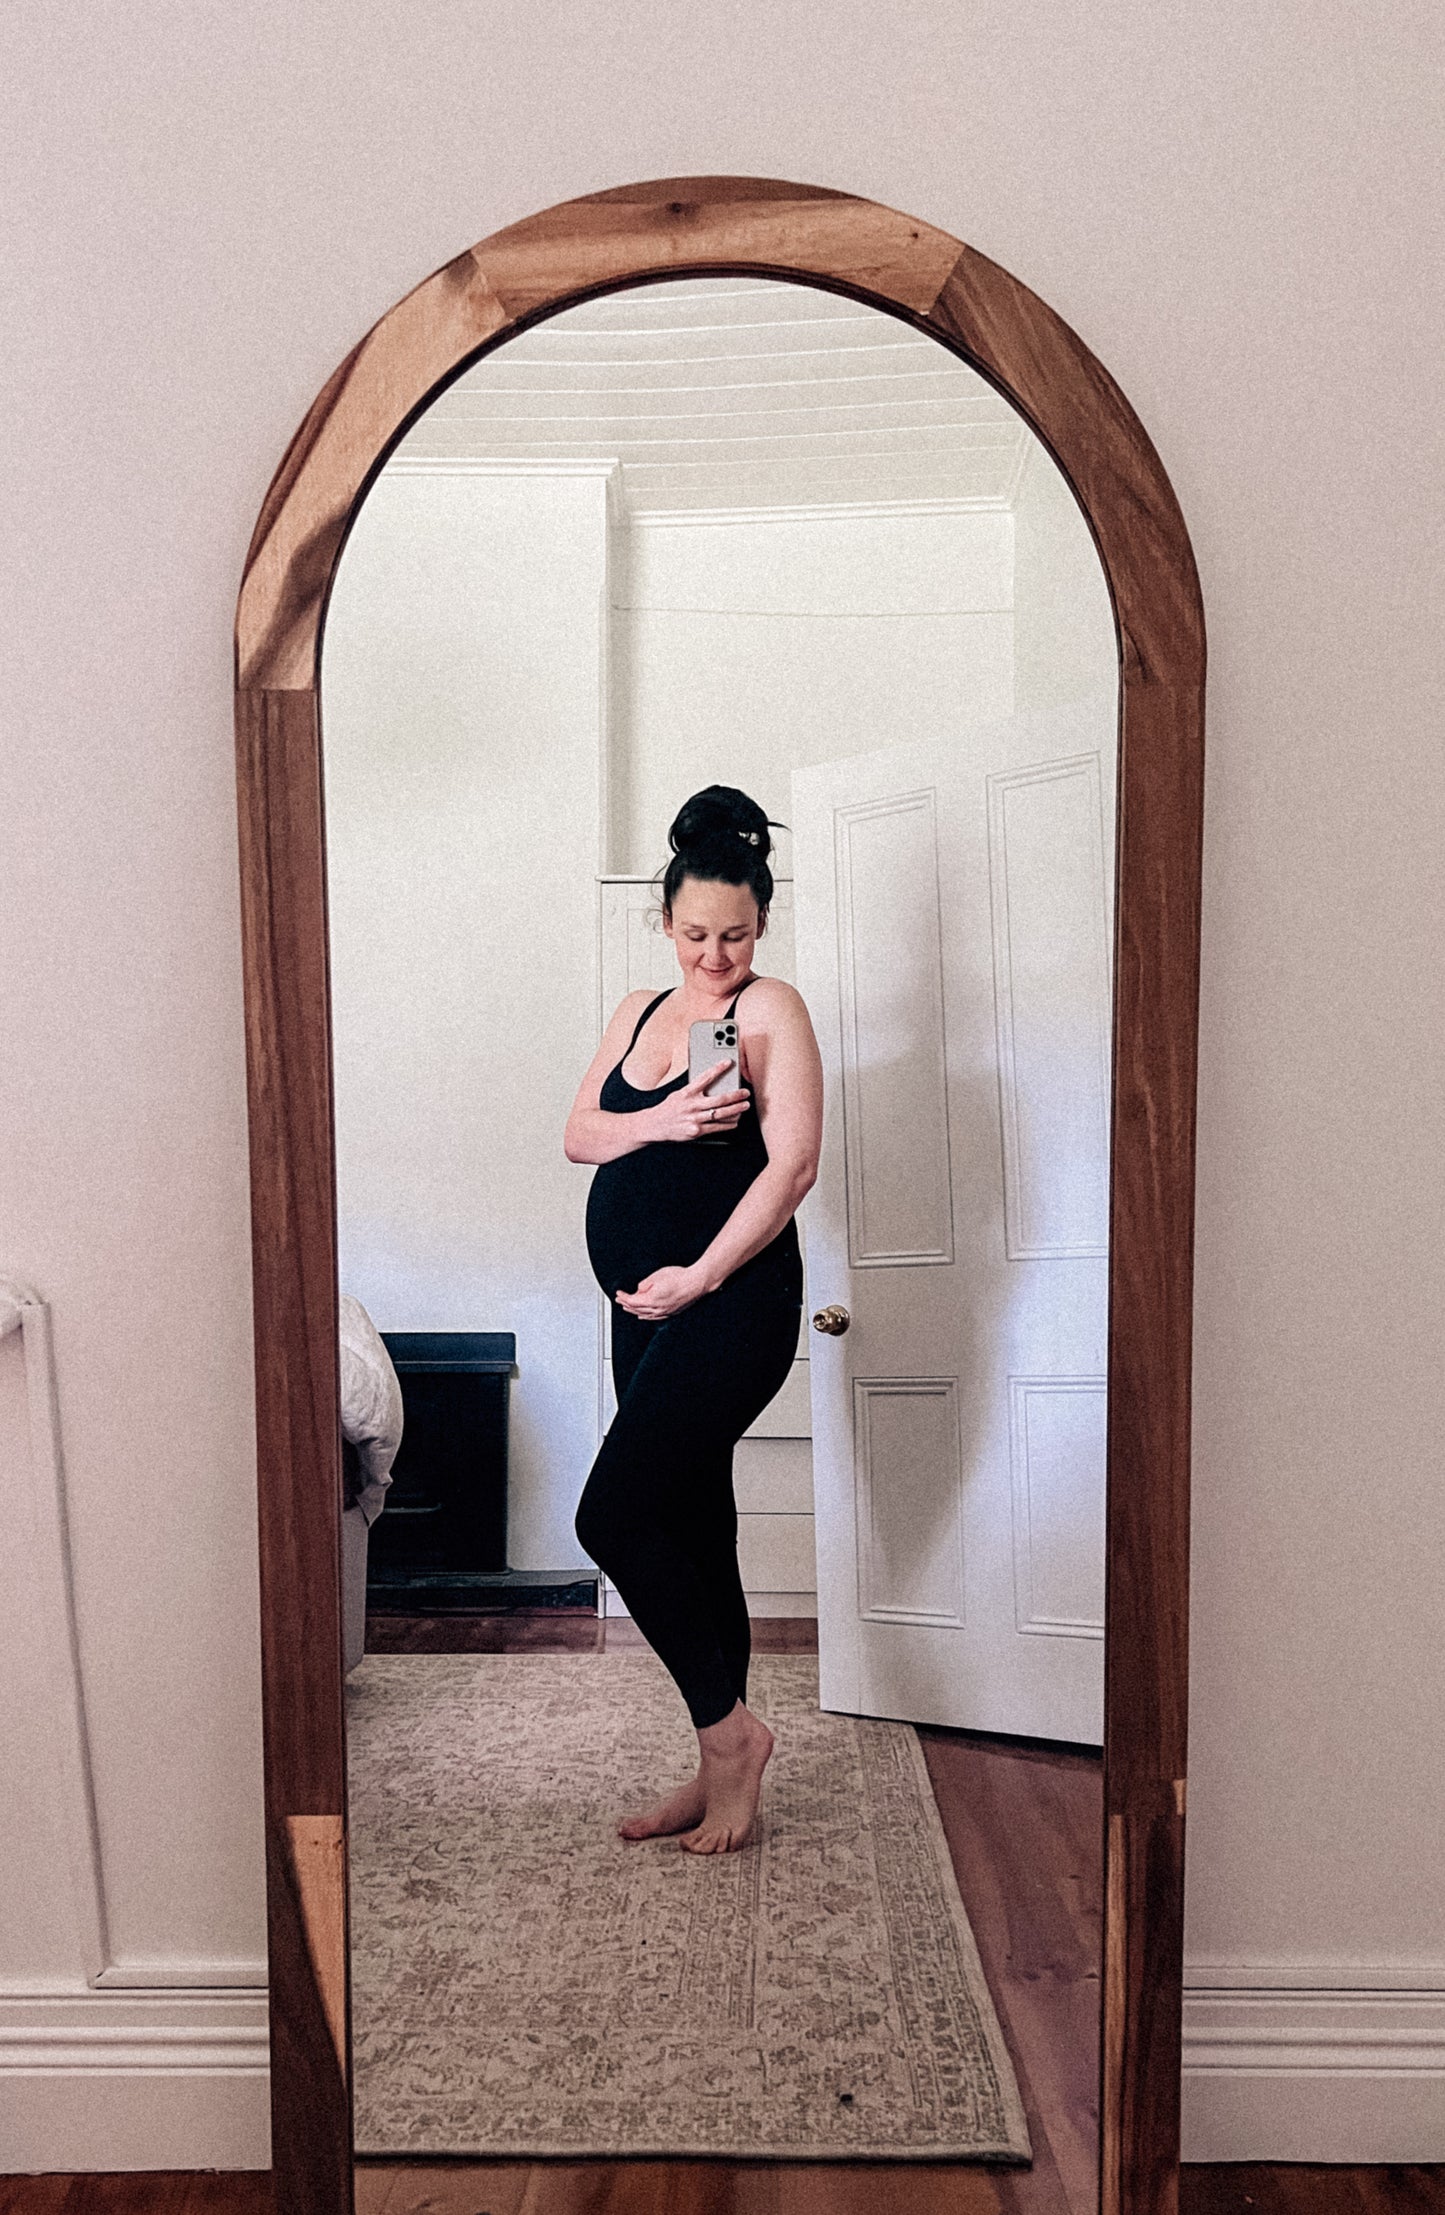 Maternity Activewear Support Leggings.